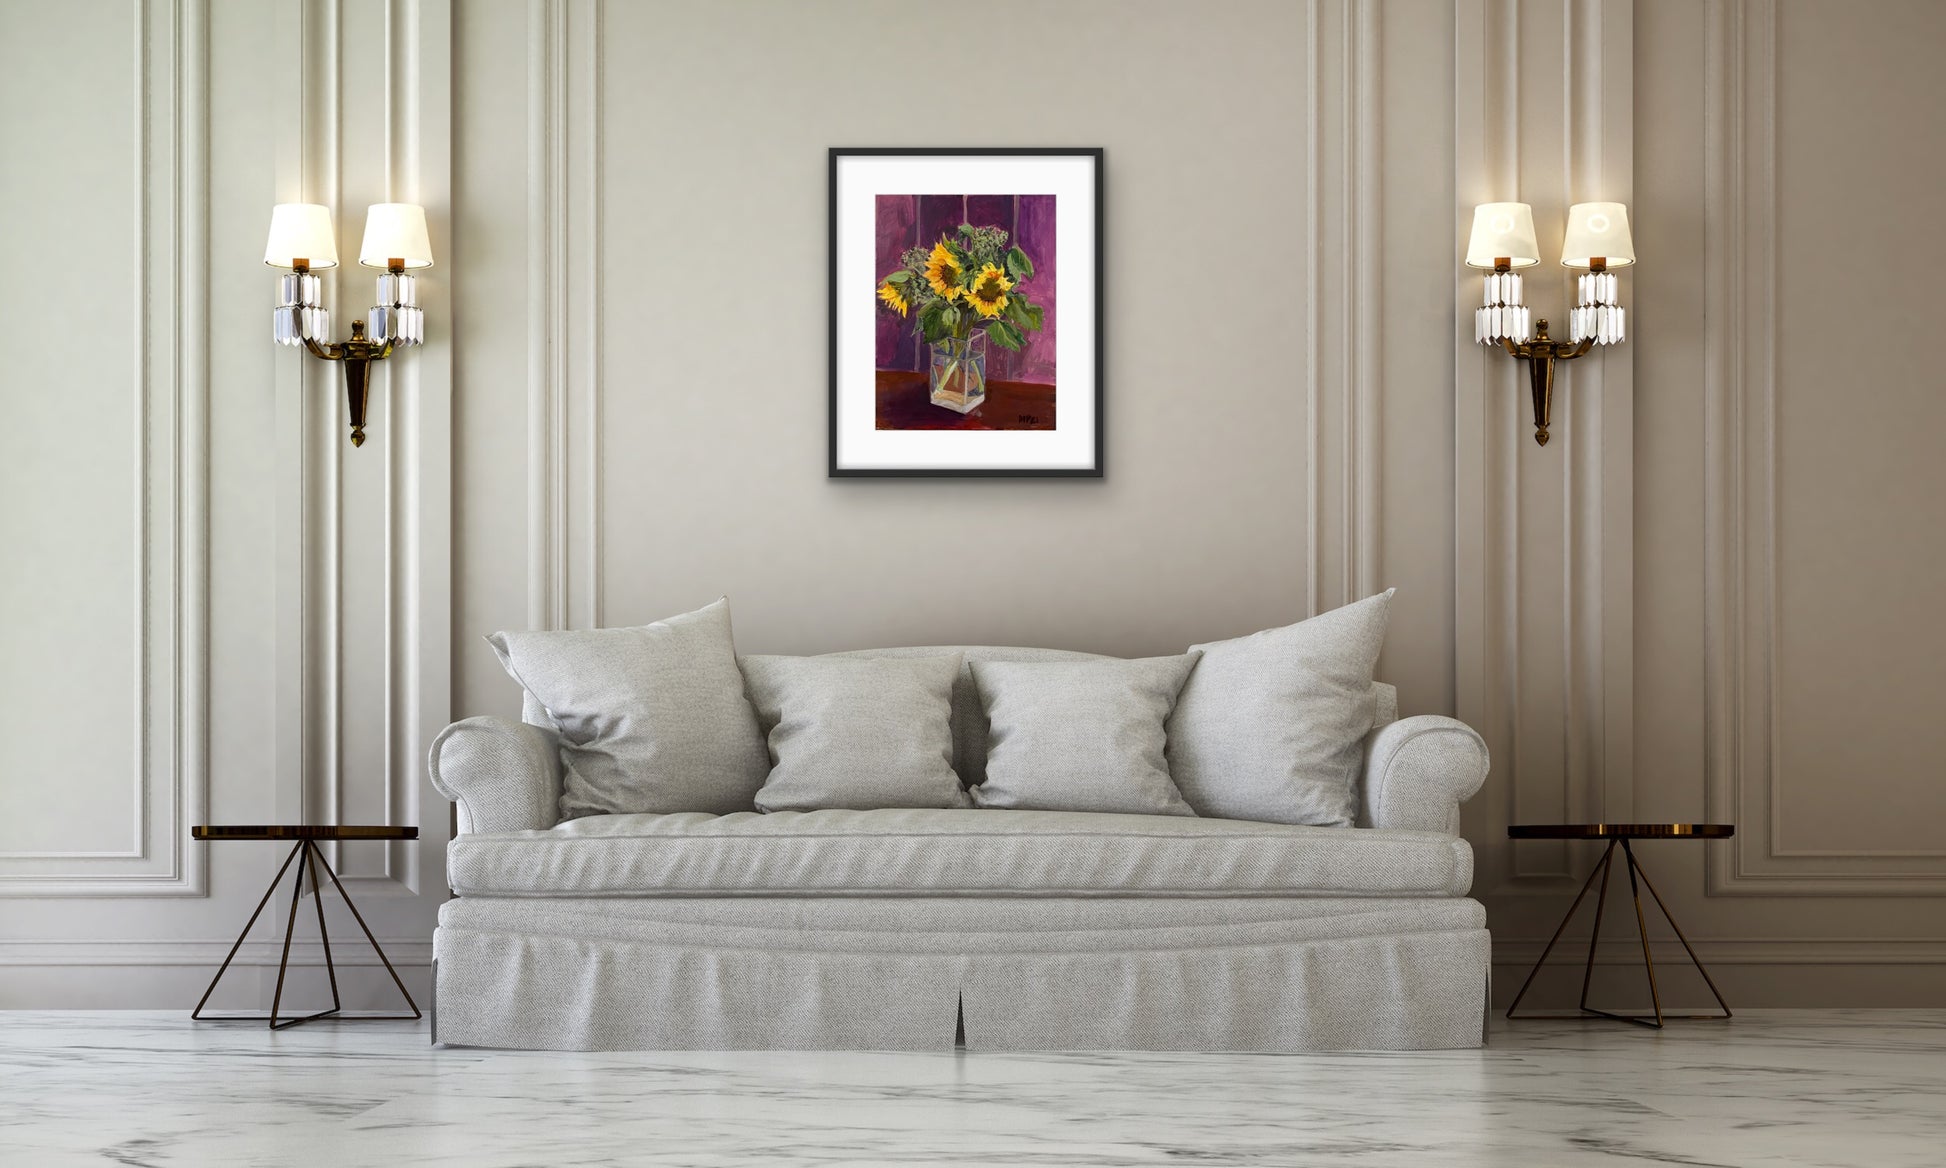 Print of Original painting by Margaret Powell Worcestershire artist of Farm Sunflowers and Sedum in a Clear Vase. Displayed in a black frame with white mount against a white wall with furniture in front. 